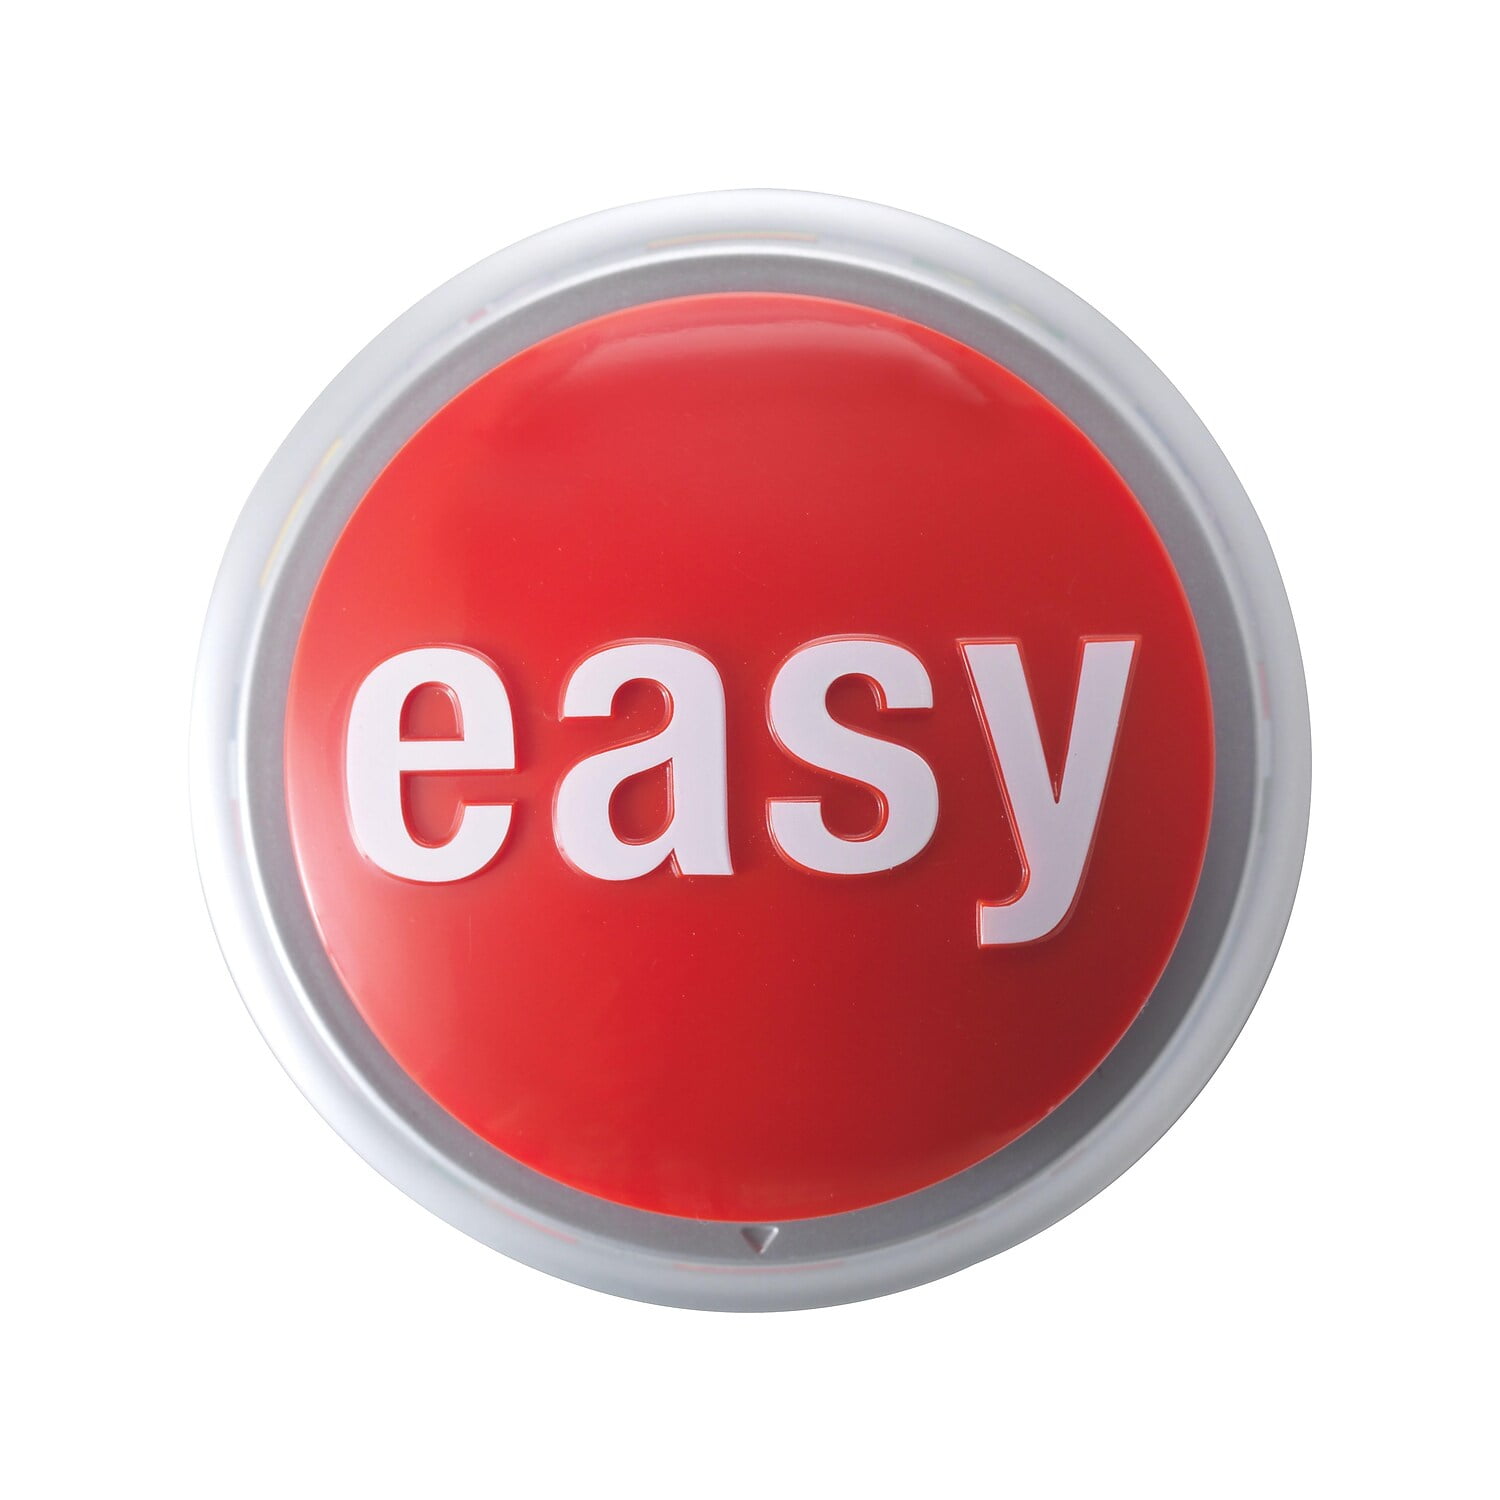 Staples Global Easy Button 953889